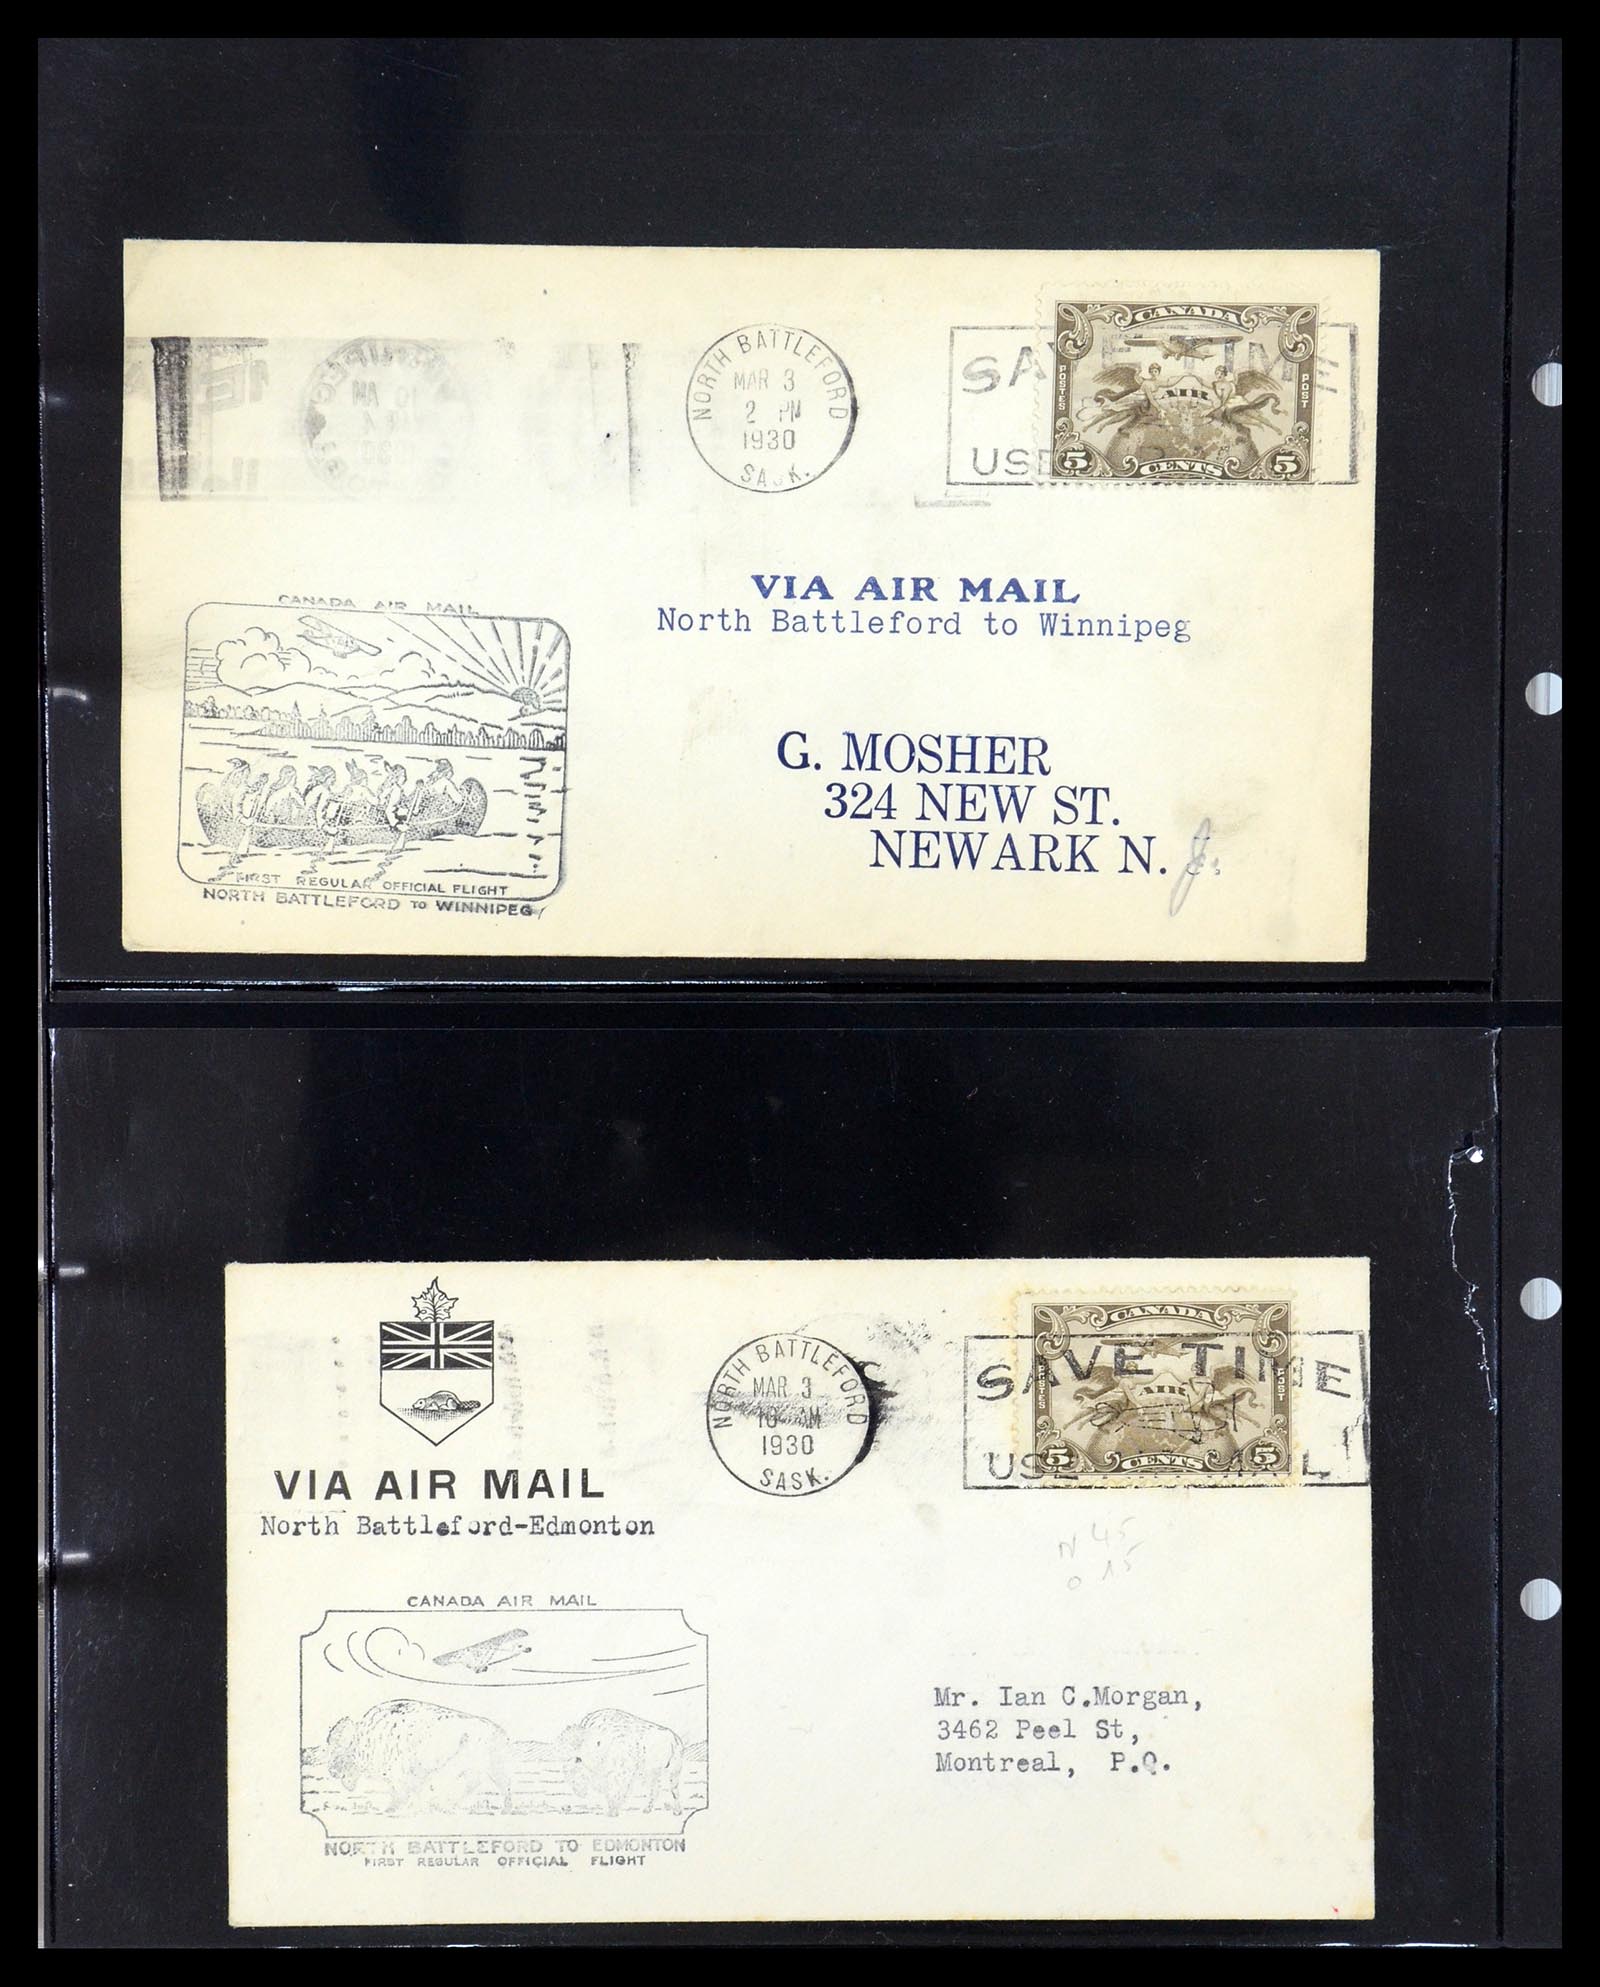 35338 066 - Stamp Collection 35338 Canada airmail covers 1927-1950.